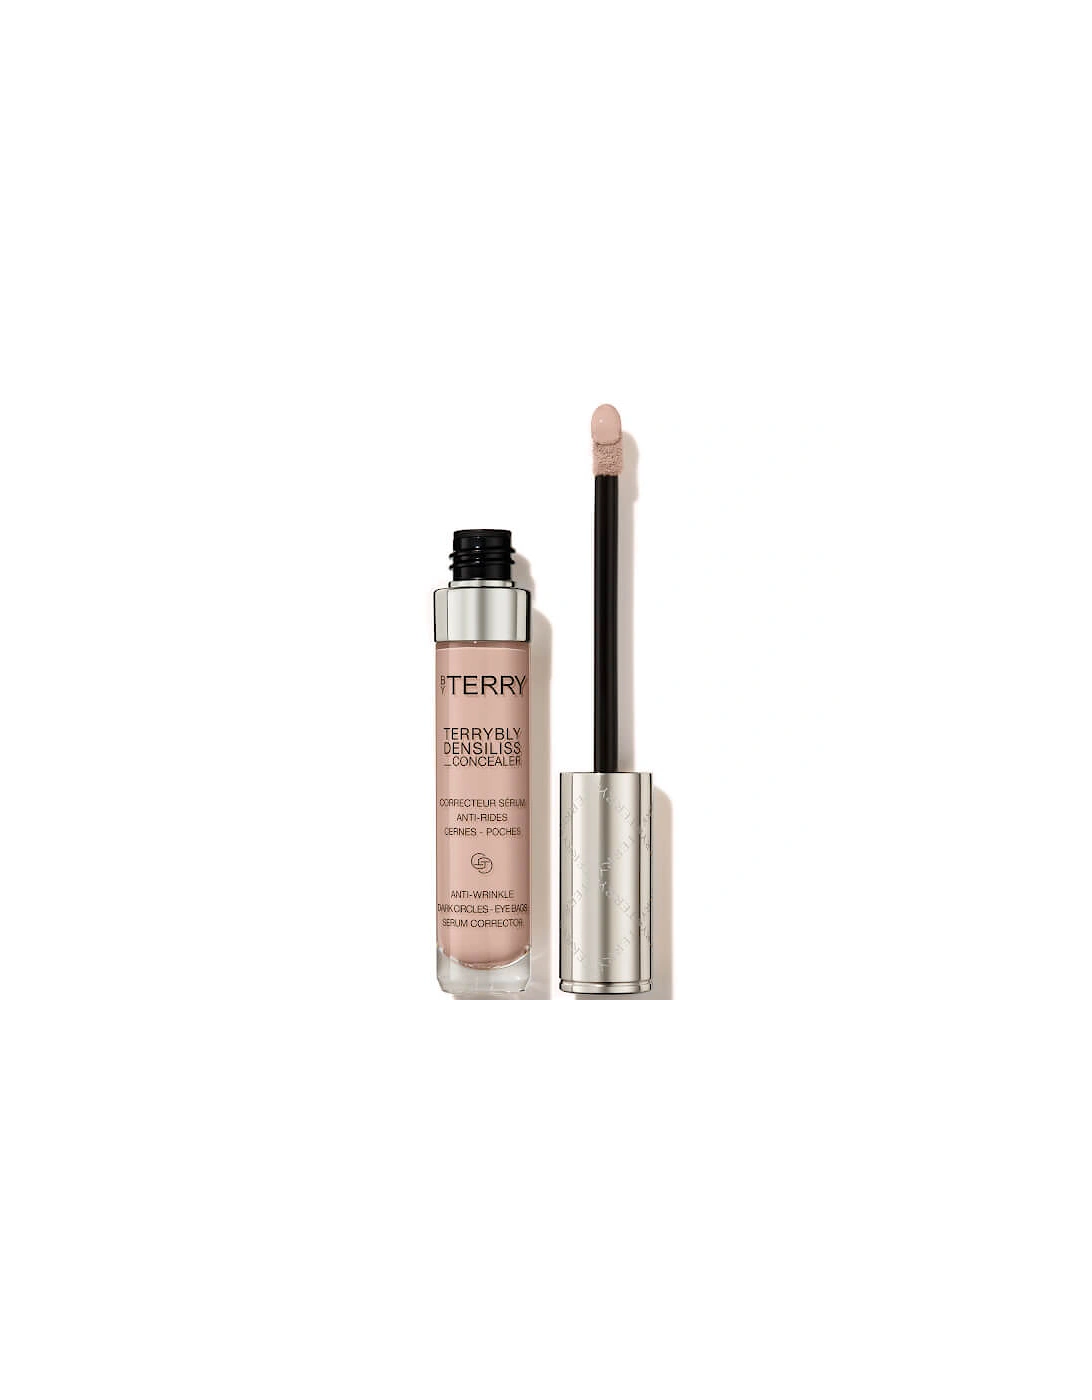 By Terry Terrybly Densiliss Concealer -2. Vanilla Beige - By Terry, 2 of 1